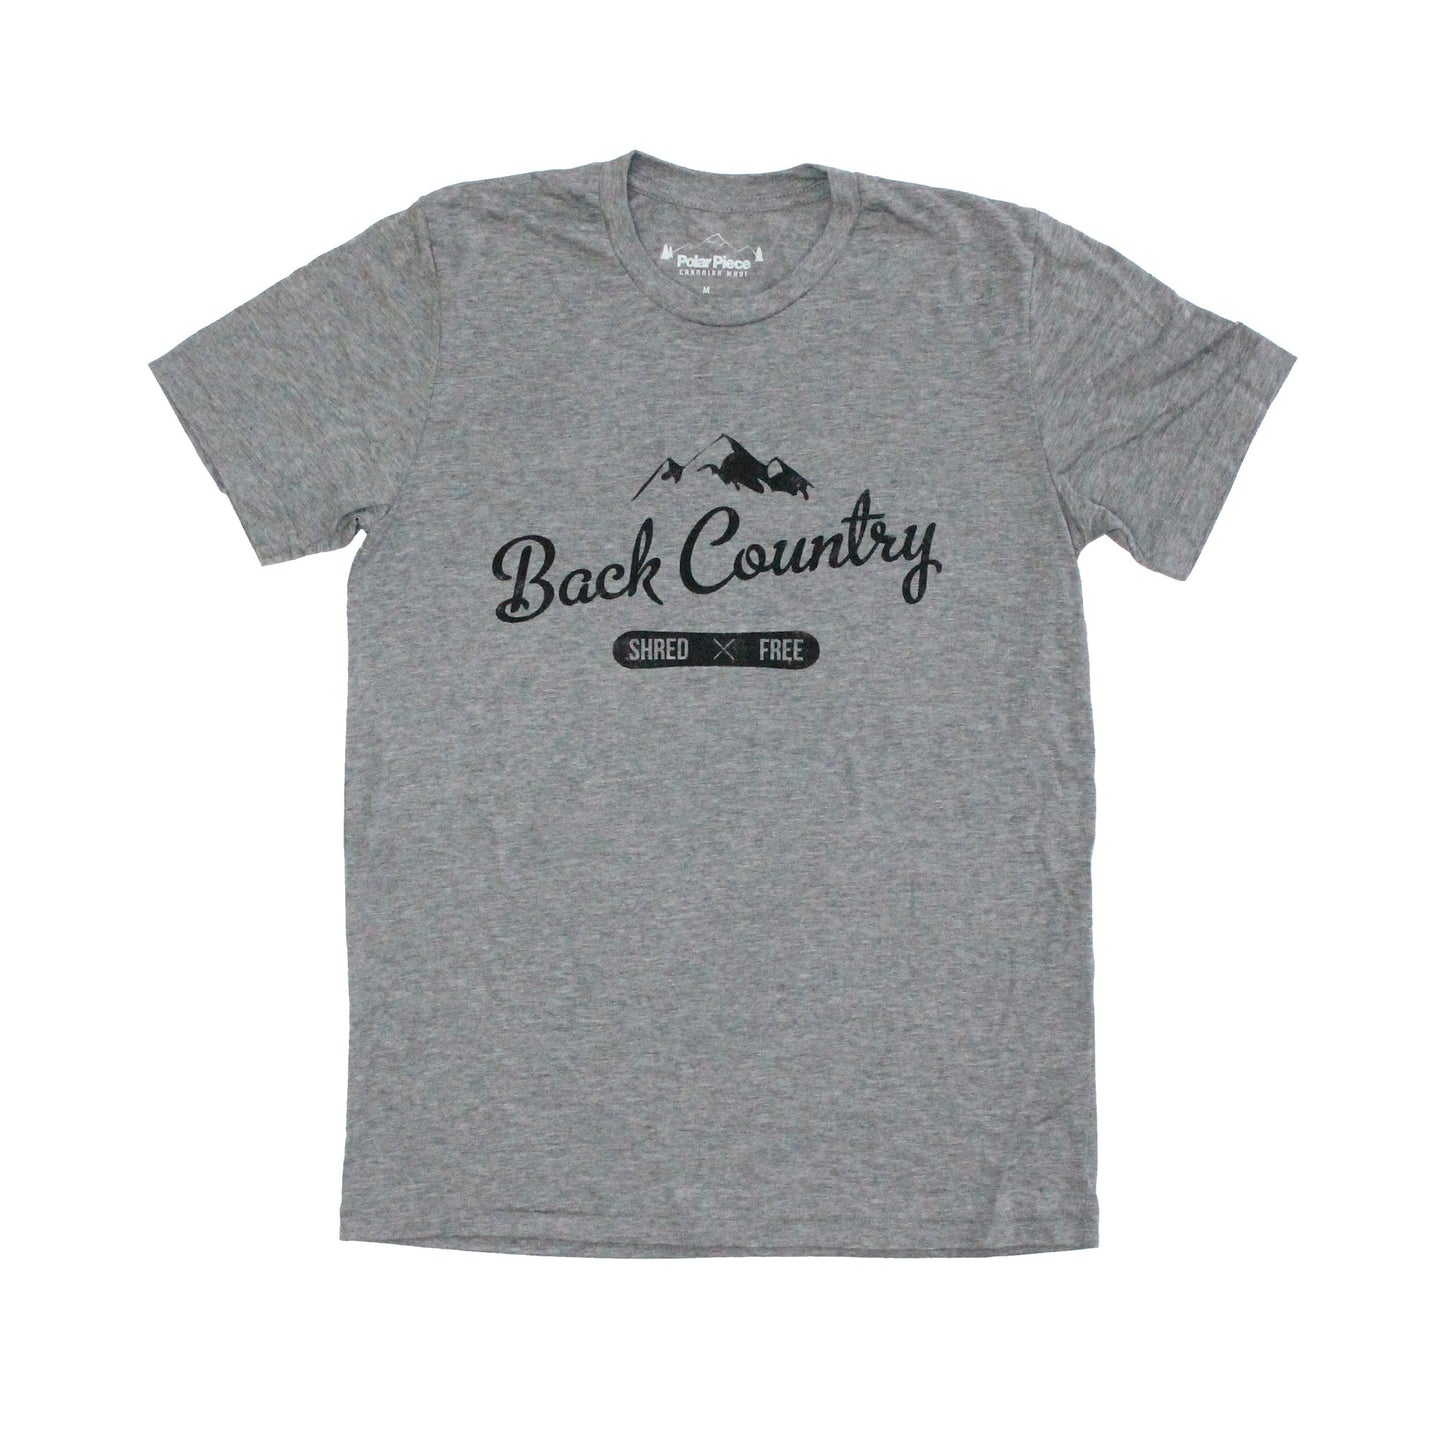 Back Country T-Shirt - PolarPiece | Simply Canadian